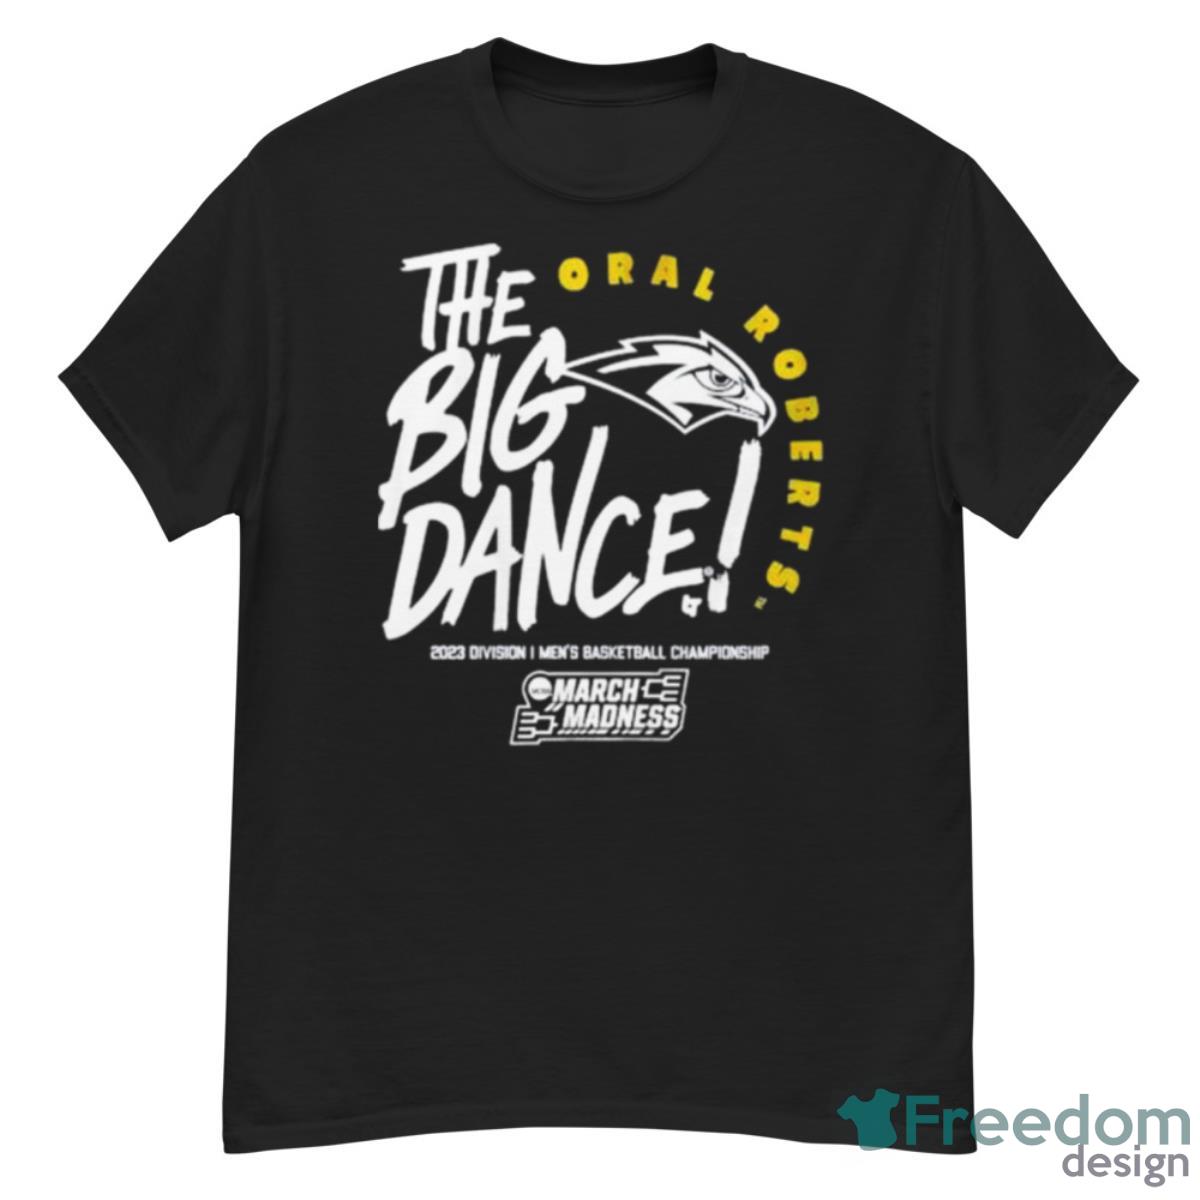 The Big Dance Oral Roberts 2023 Division I Men’S Basketball Championship March Madness Shirt - G500 Men’s Classic T-Shirt